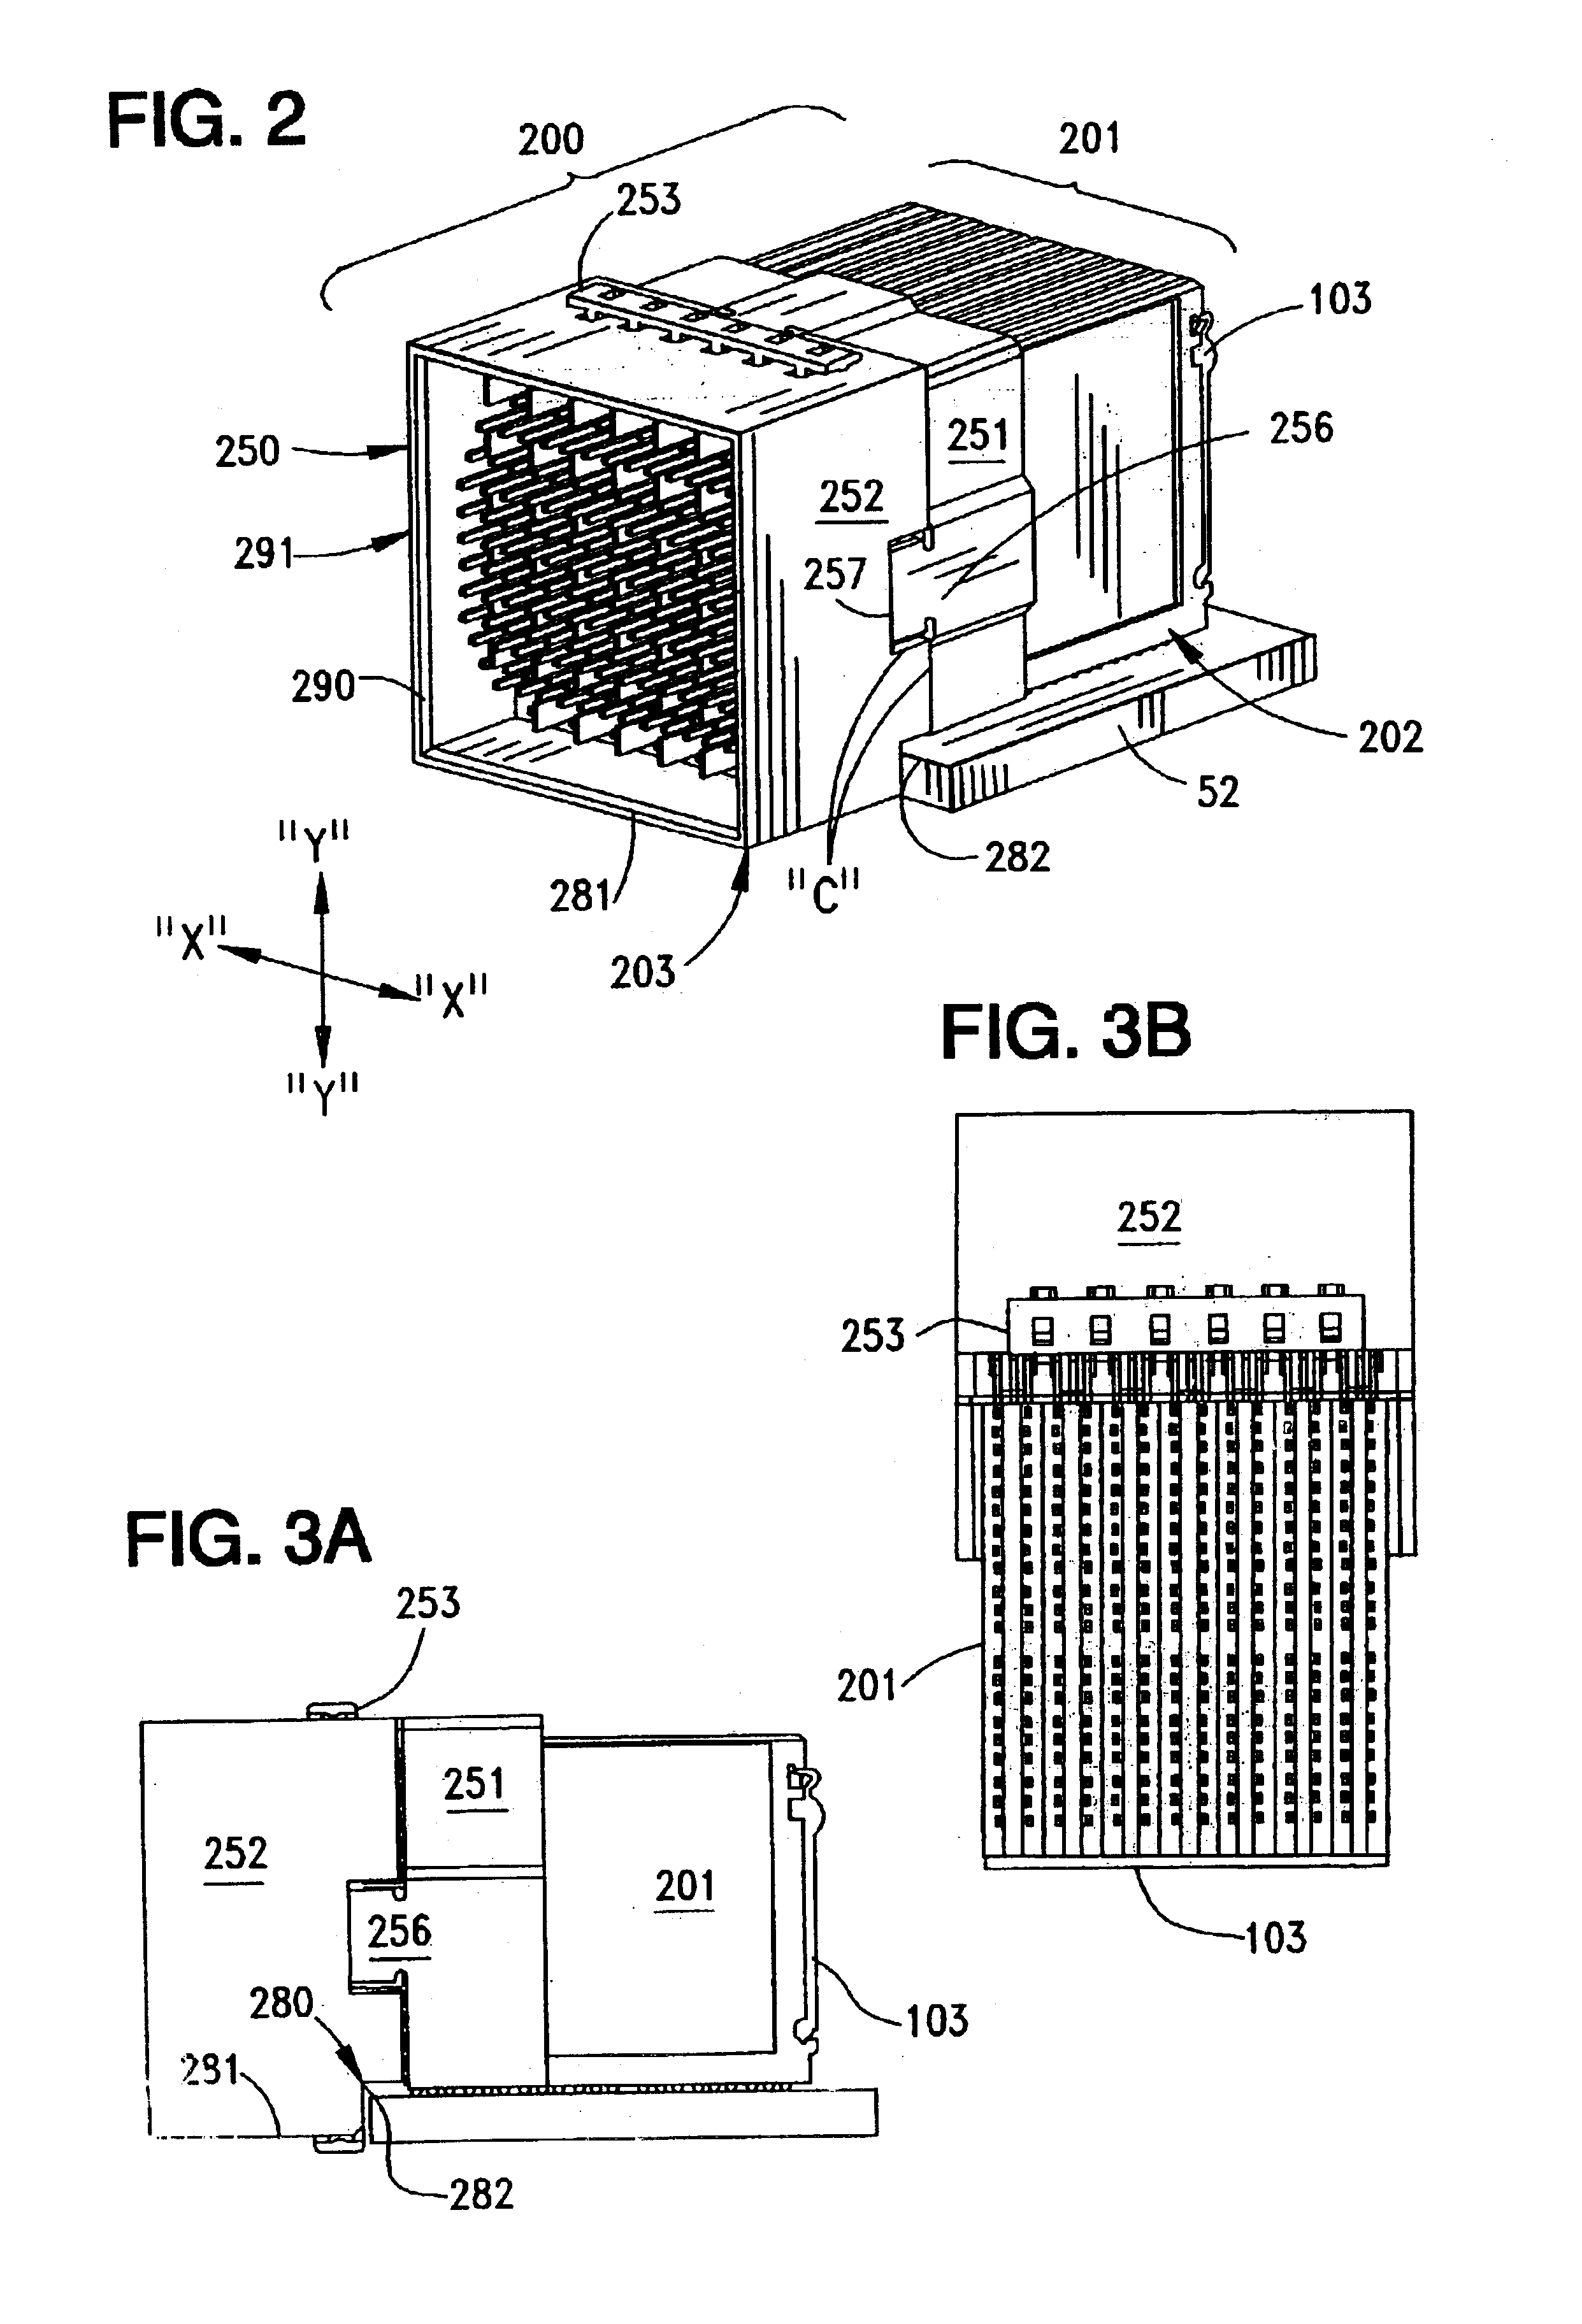 High-density connector assembly with flexural capabilities